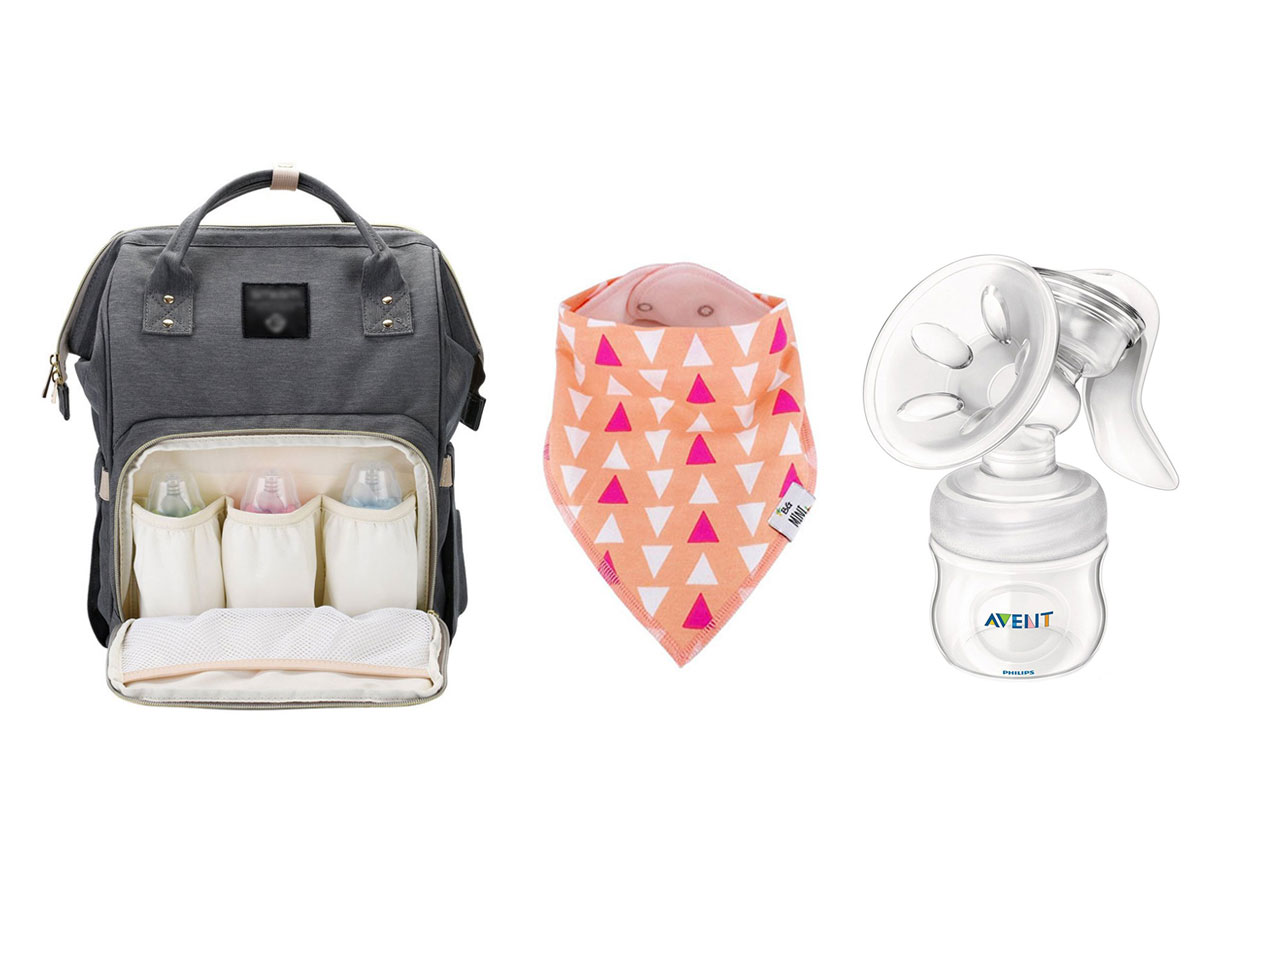 15 baby essentials from Amazon for new 